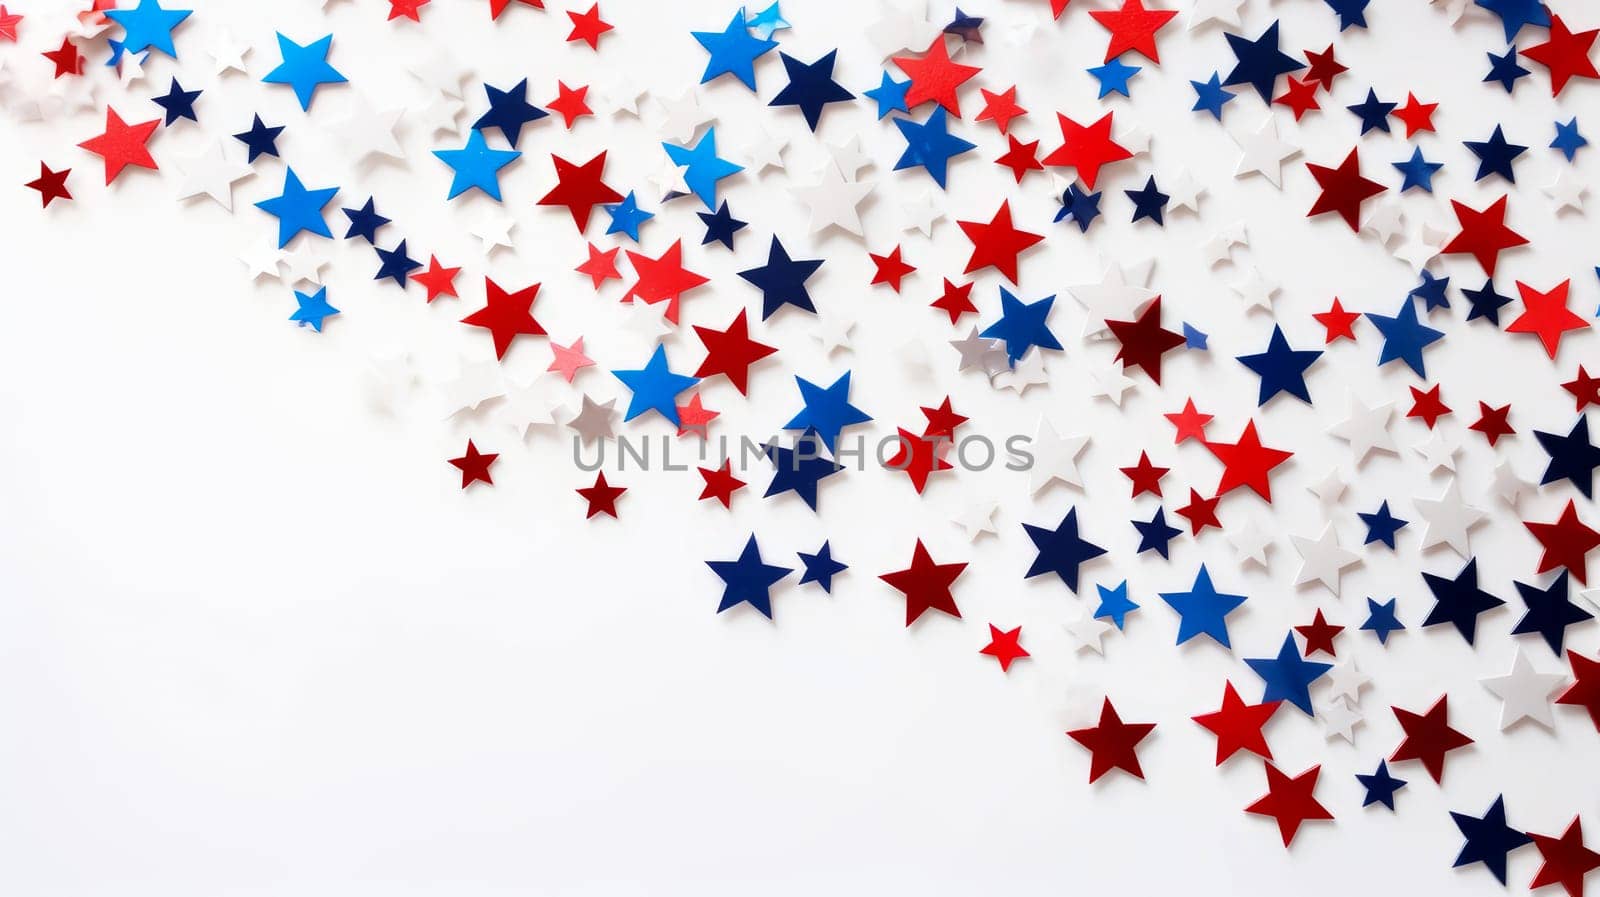 Star confetti in the colors of the United States of America flag on a white background. American President's Day, USA Independence Day, American flag colors background, 4 July, February holiday, stars and stripes, red and blue